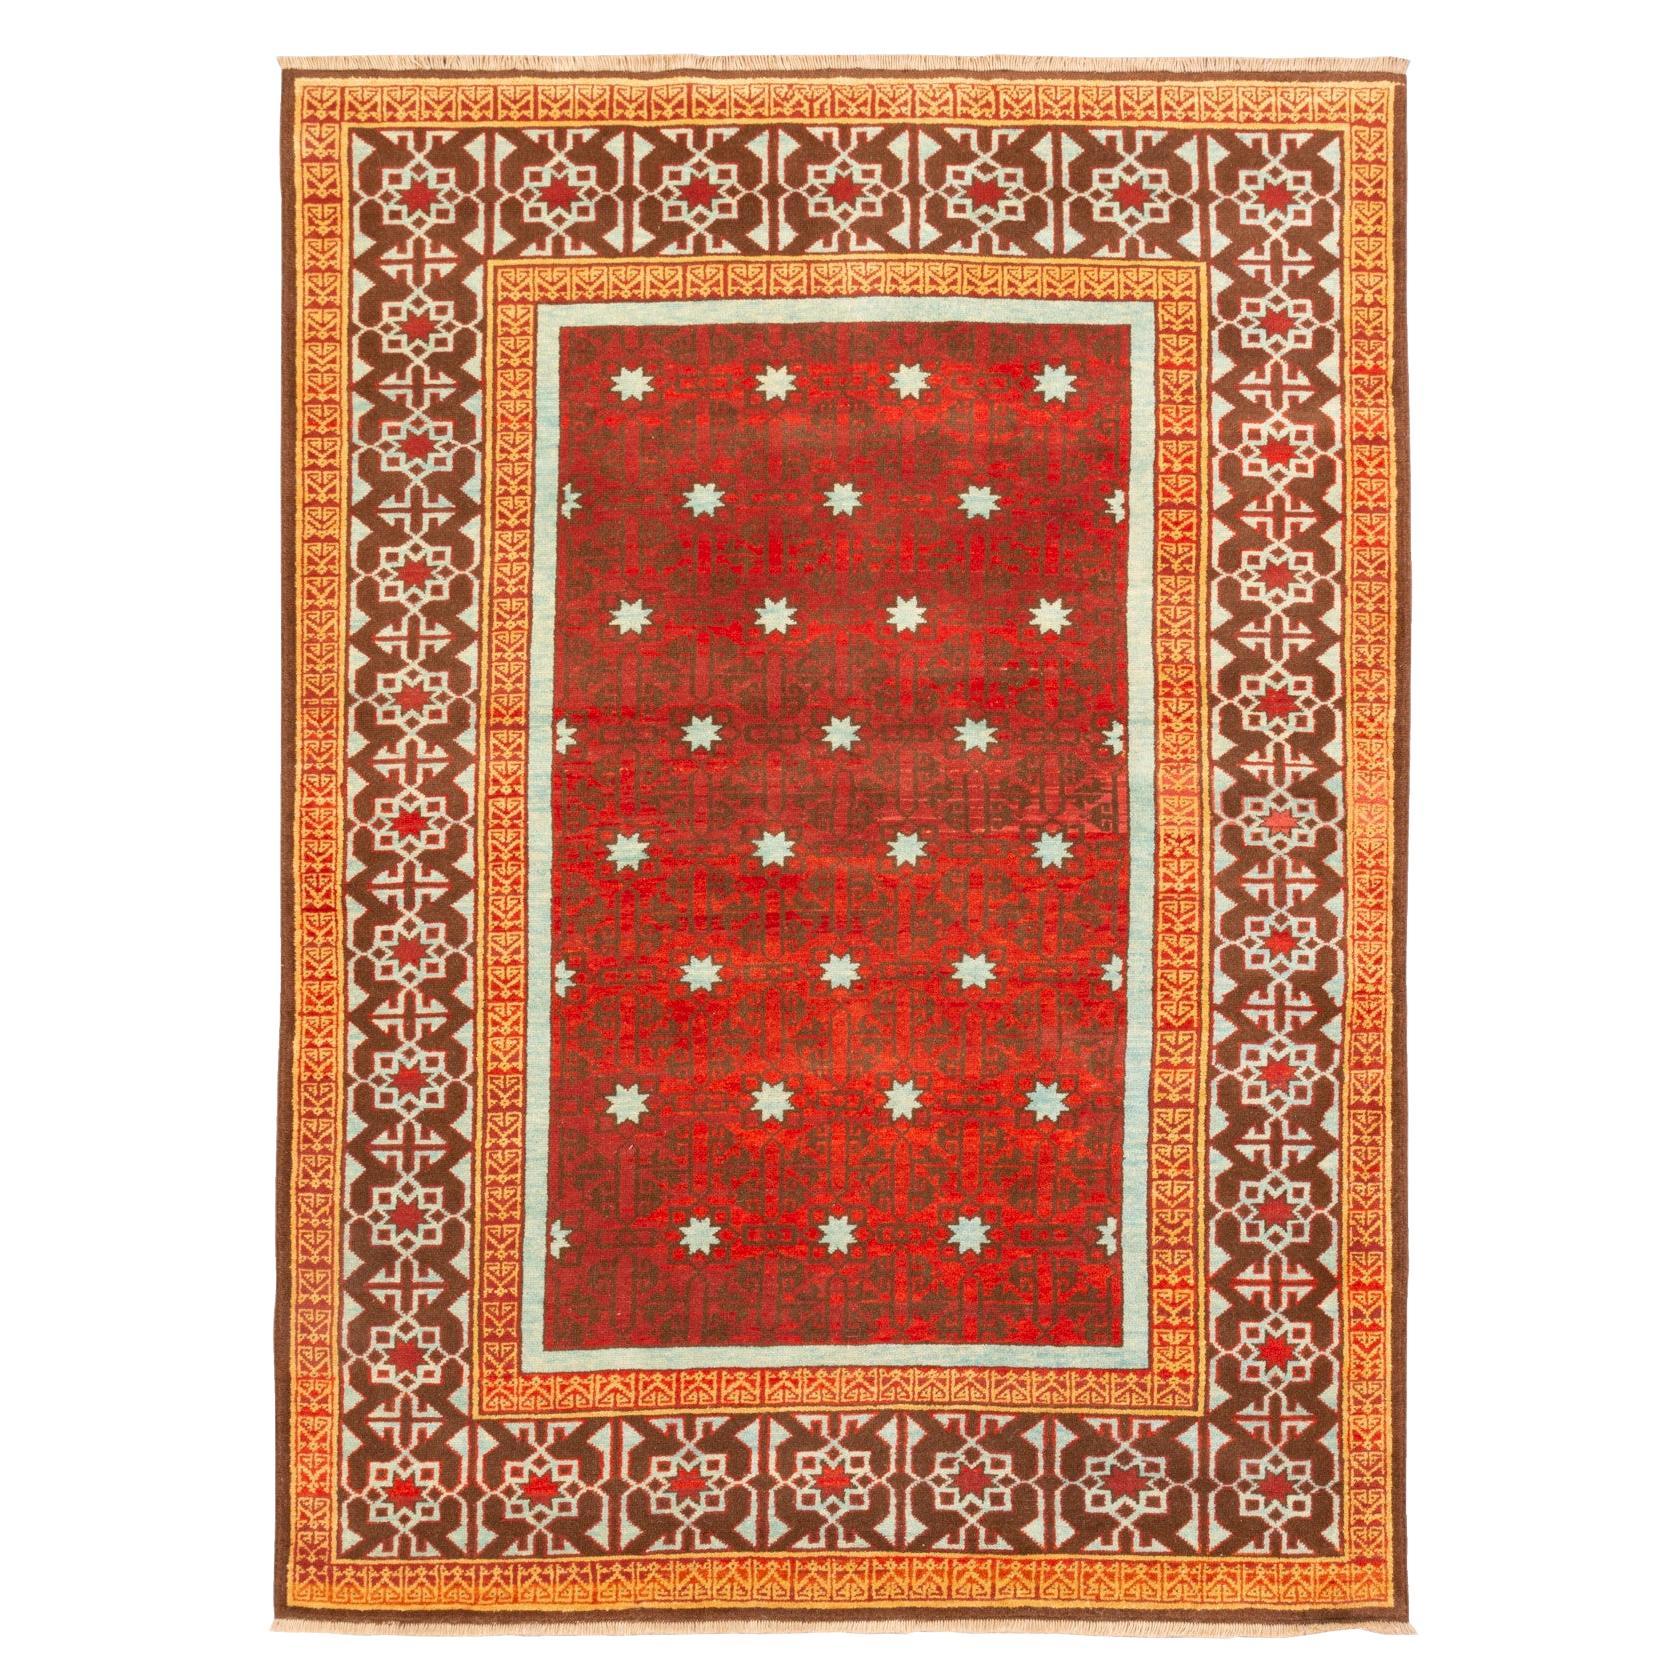 Ararat Rugs the Alaeddin Mosque Flowers and Stars Lattice Carpet, Natural Dyed For Sale